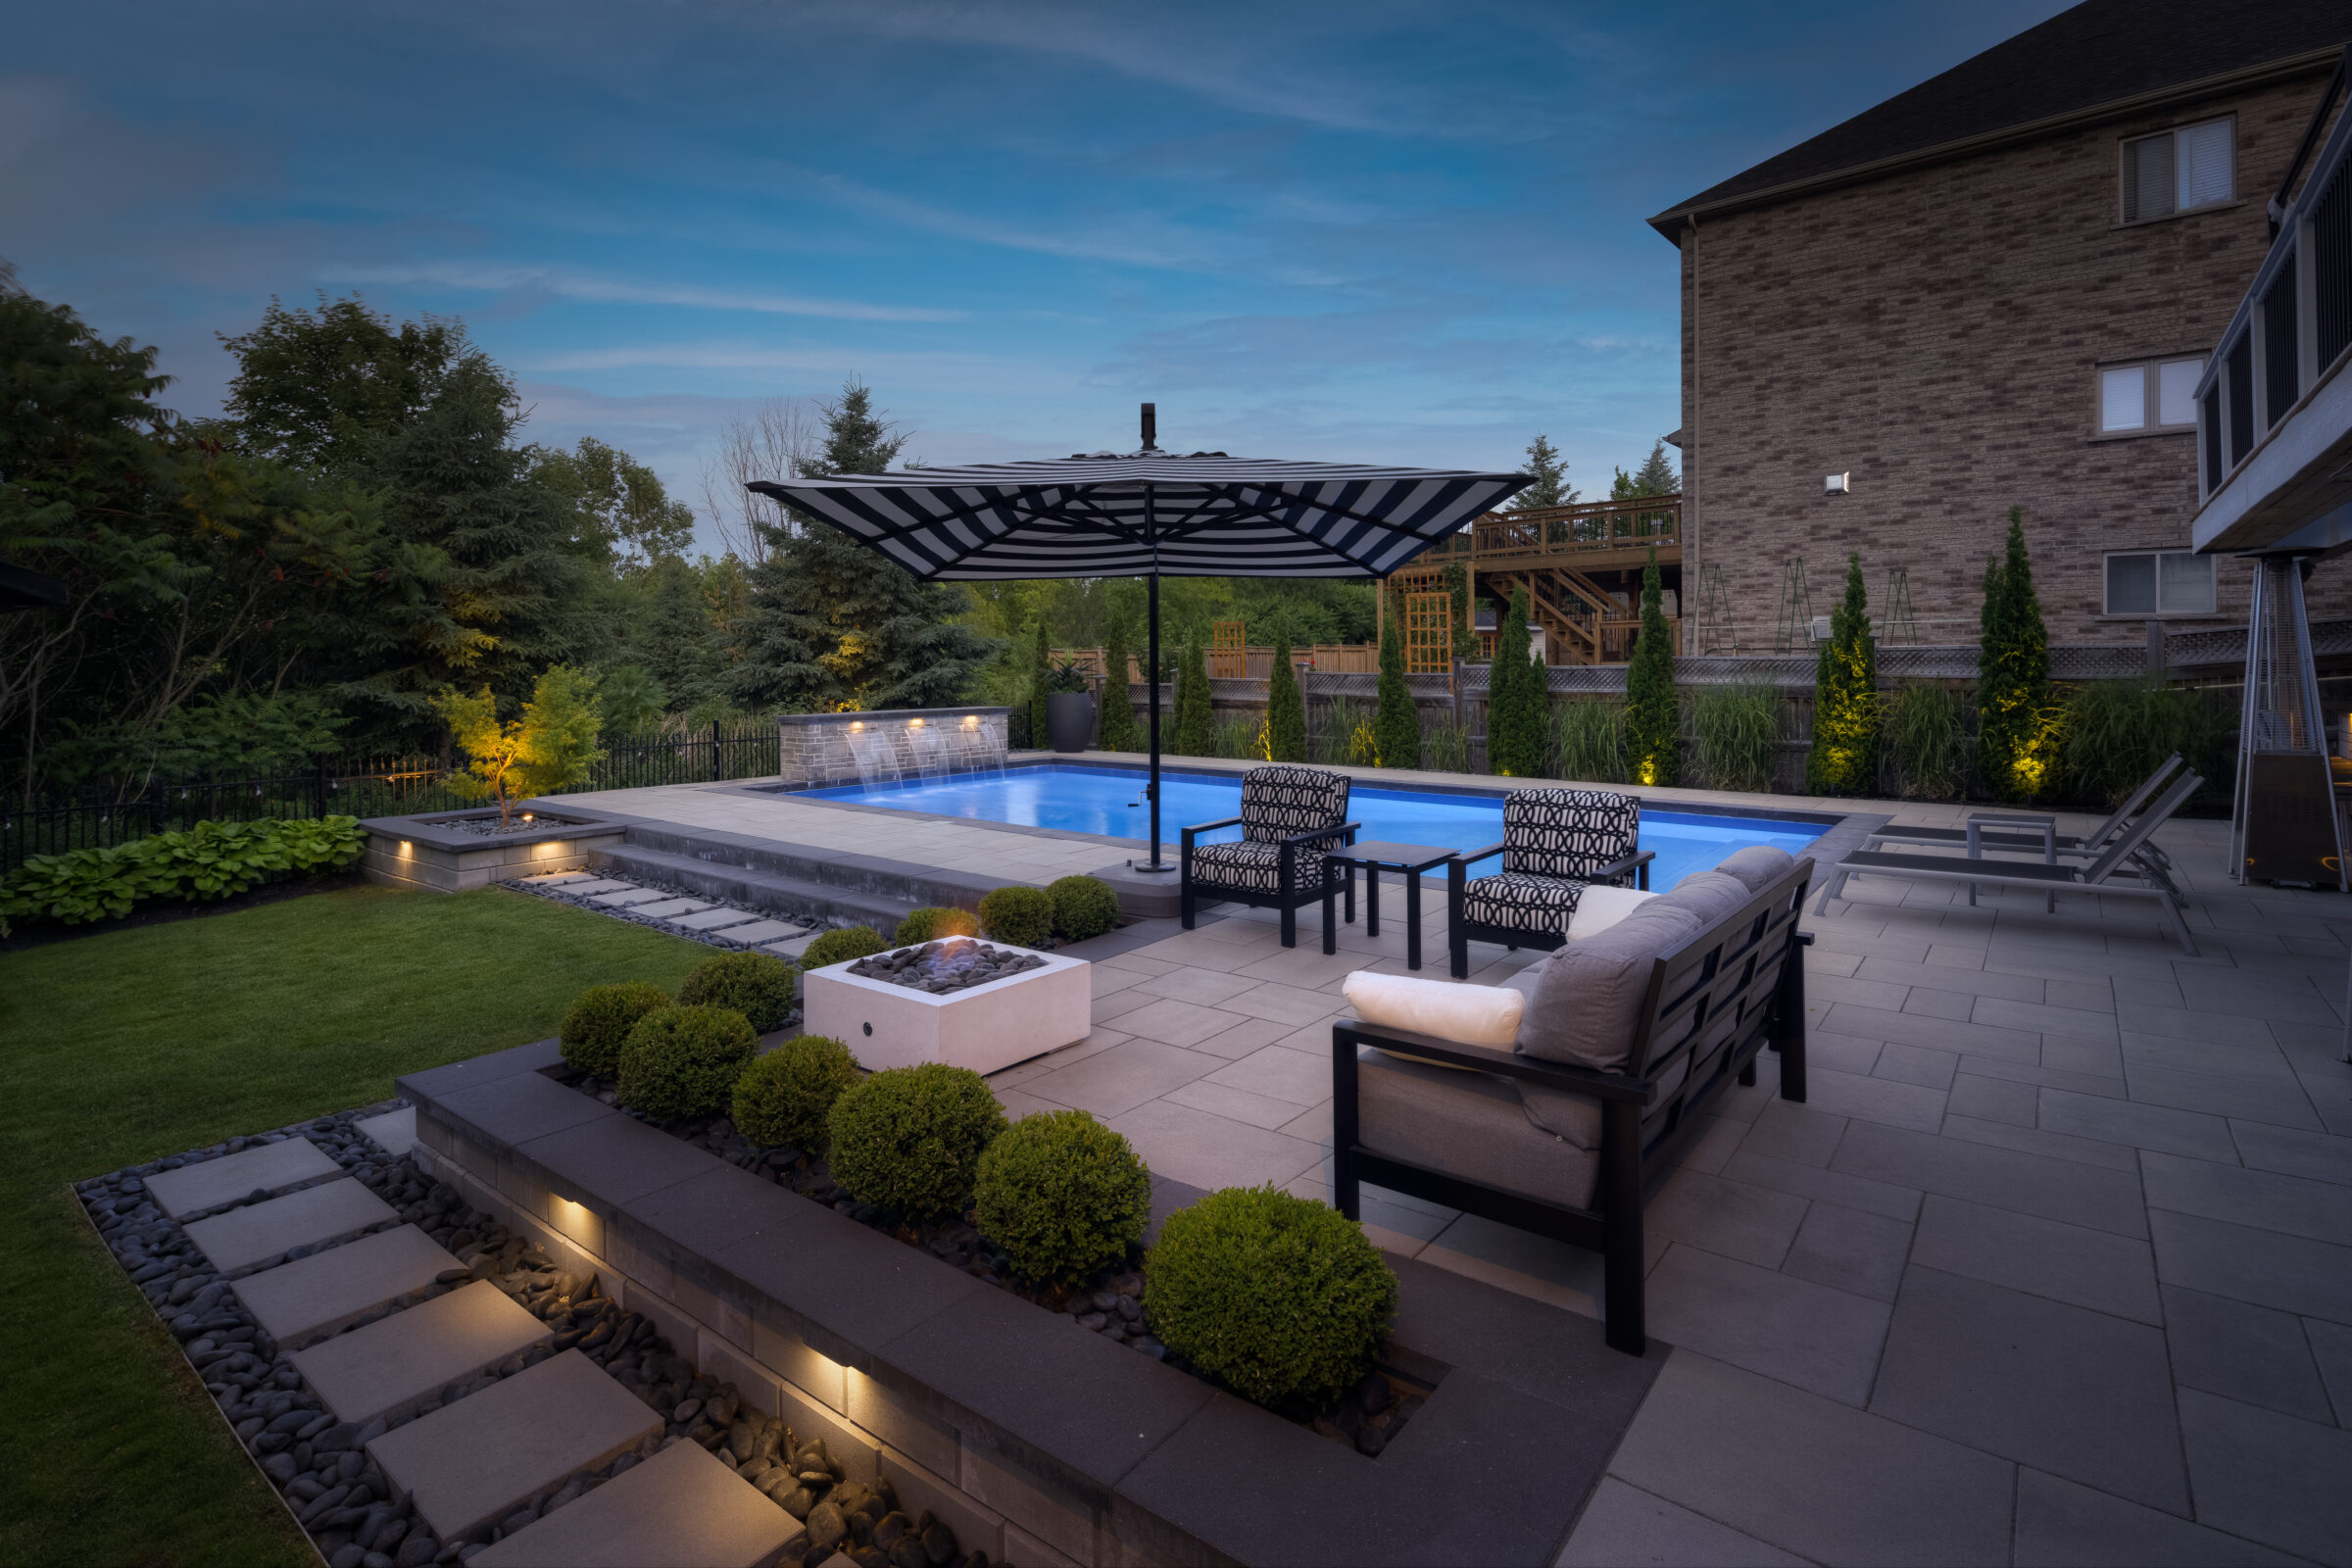 An elegant outdoor pool area at dusk, featuring stylish furniture, a fireplace, landscaping, and a modern house, creating a luxurious backyard atmosphere.